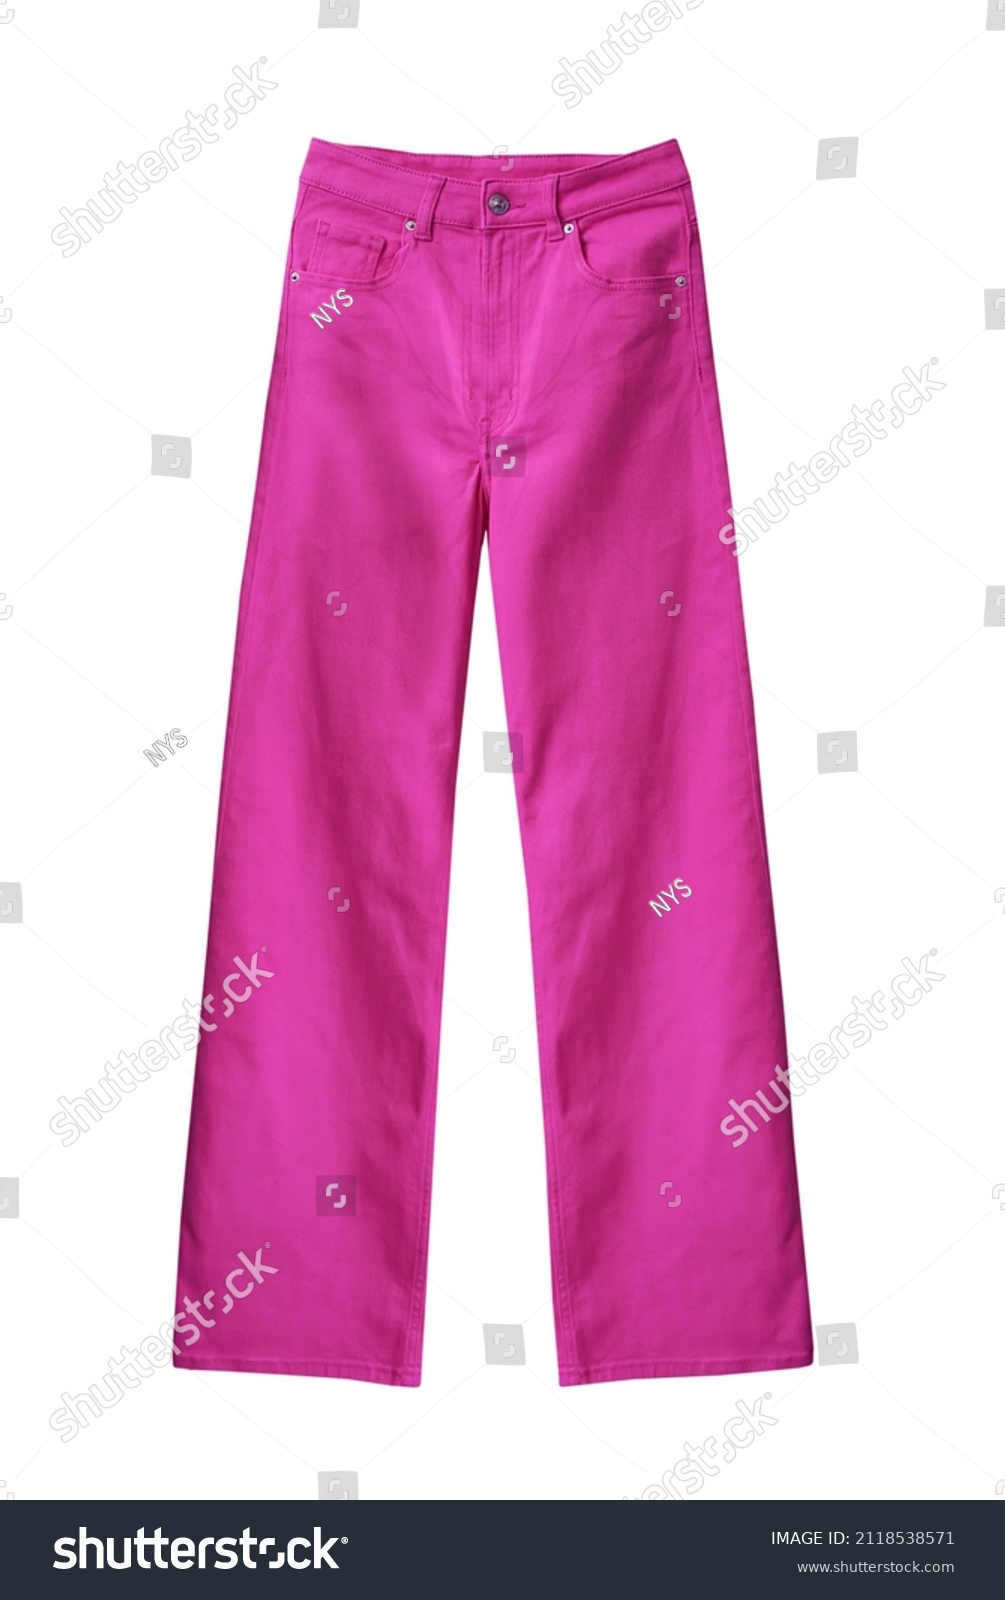 Fuchsia color jeans isolated on white. Trending clothing. Pink pants. #2118538571